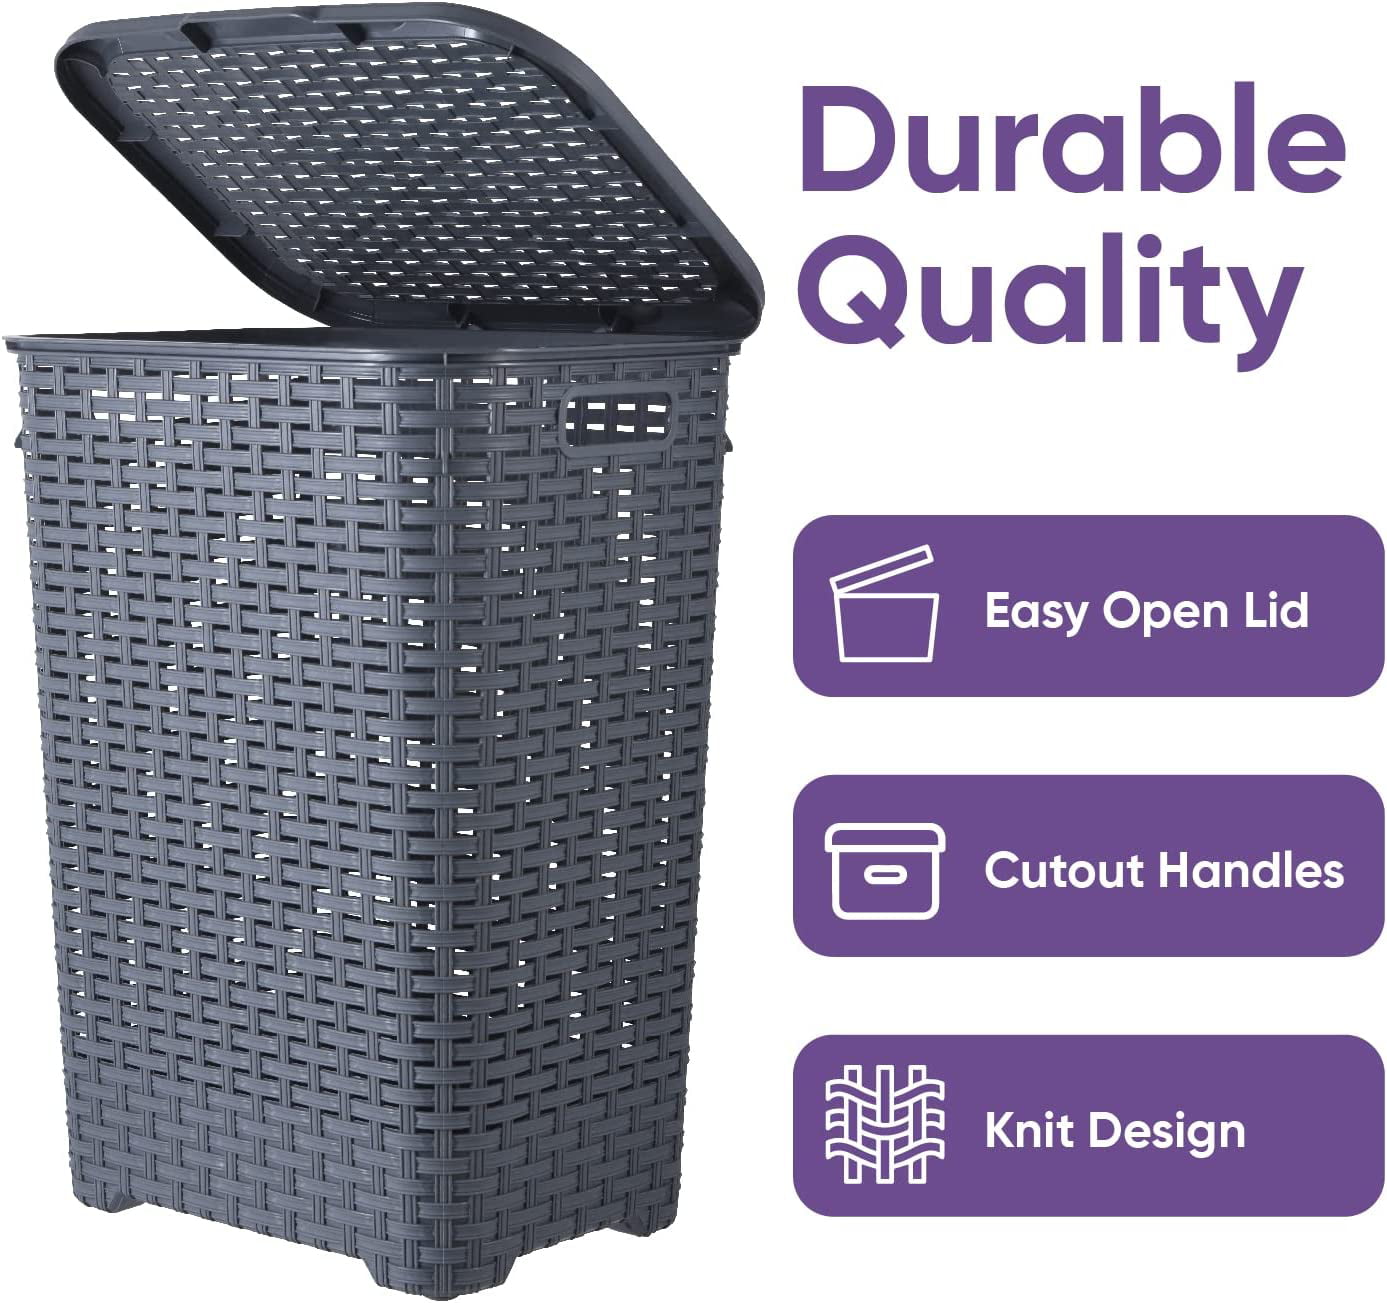 Superio Brand 60L Large Wicker Plastic Laundry Hamper with Lid - Brown